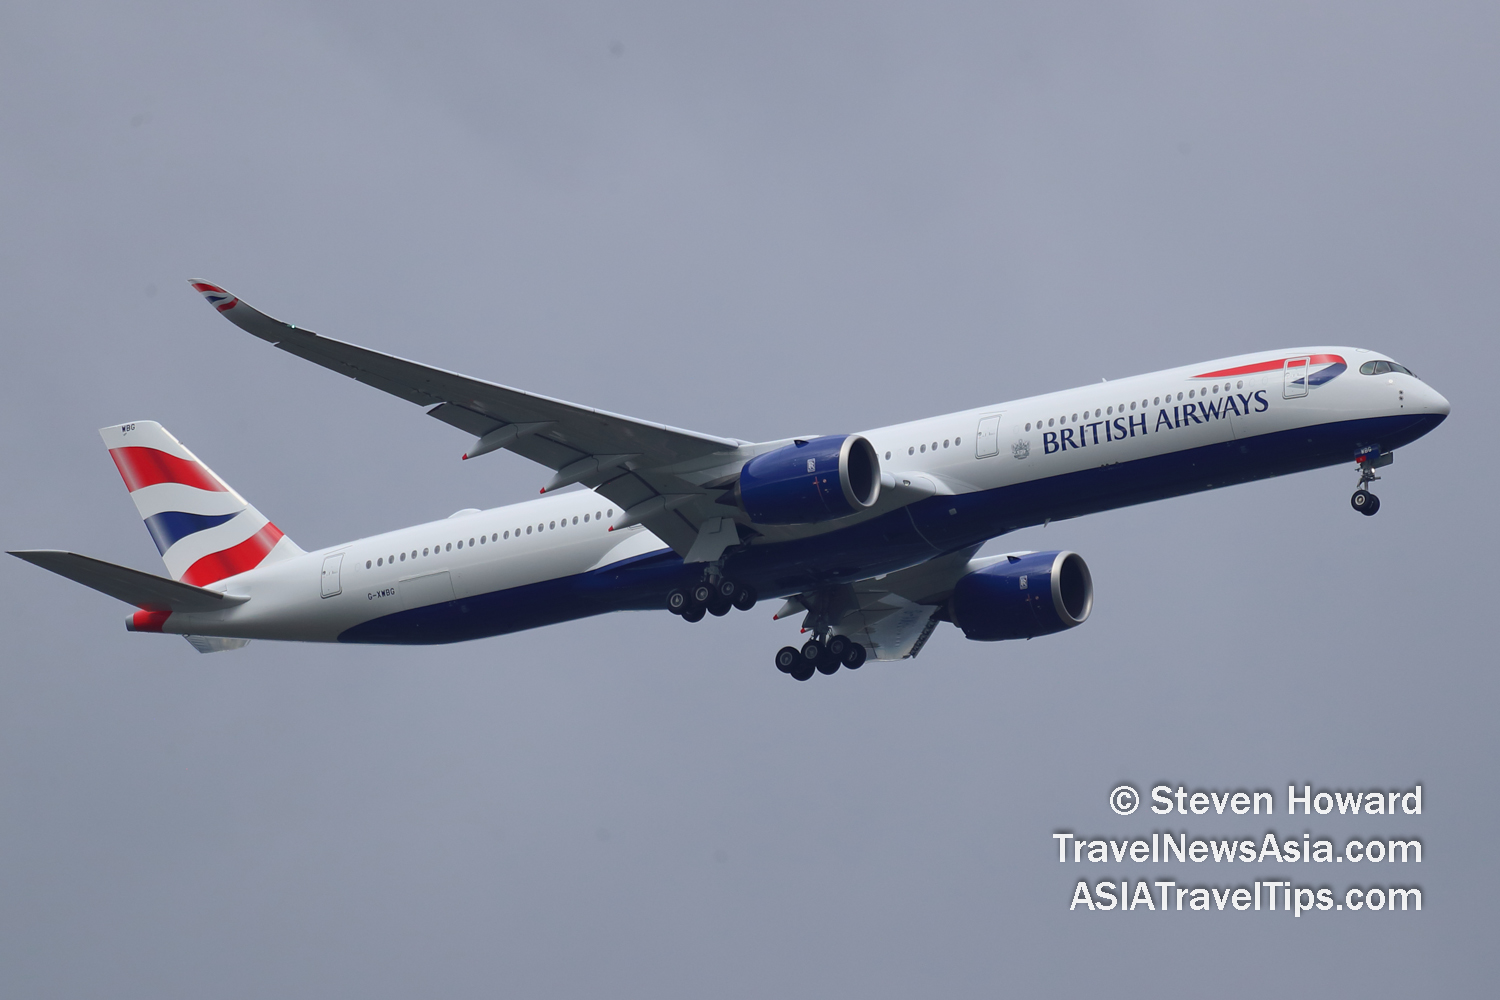 British Airways Airbus A350-1000 reg: G-XWBG. Picture by Steven Howard of TravelNewsAsia.com Click to enlarge.